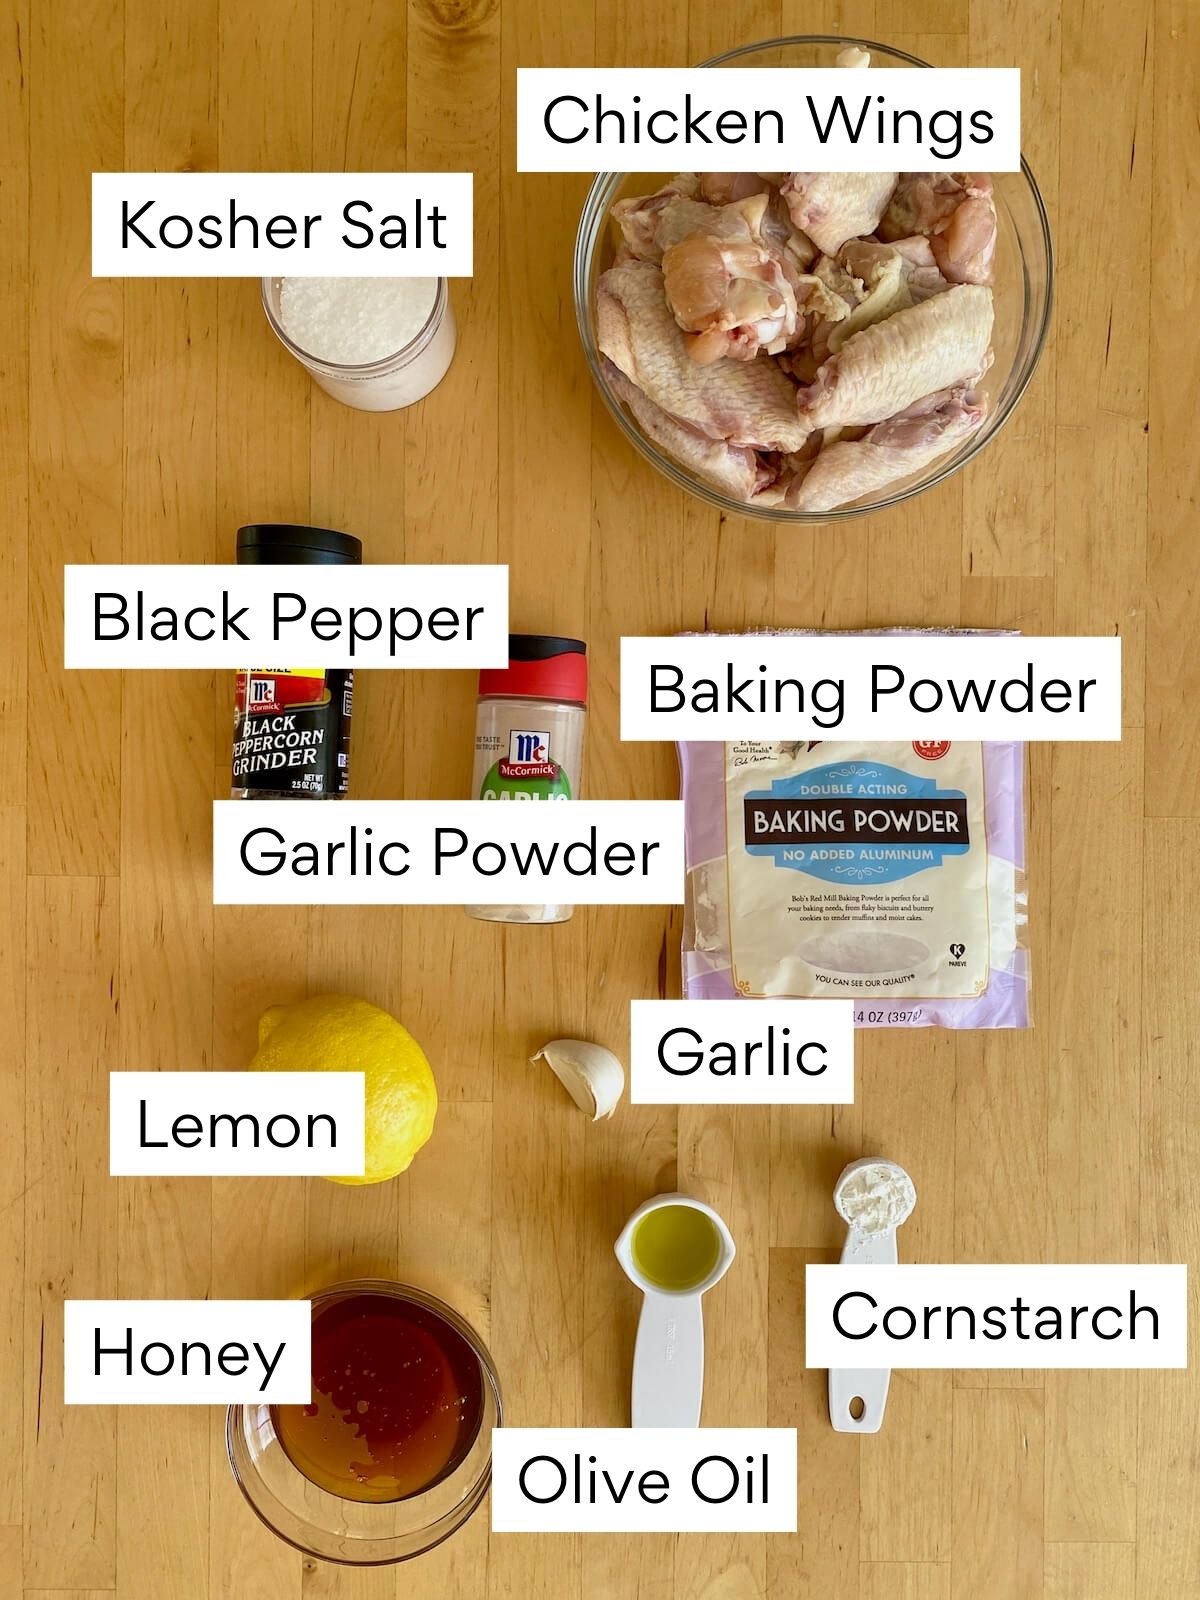 The ingredients to make honey lemon pepper wings. Each ingredient is labeled with text. They include chicken wings, kosher salt, black pepper, baking powder, garlic powder, garlic, lemon, honey, olive oil, and cornstarch.